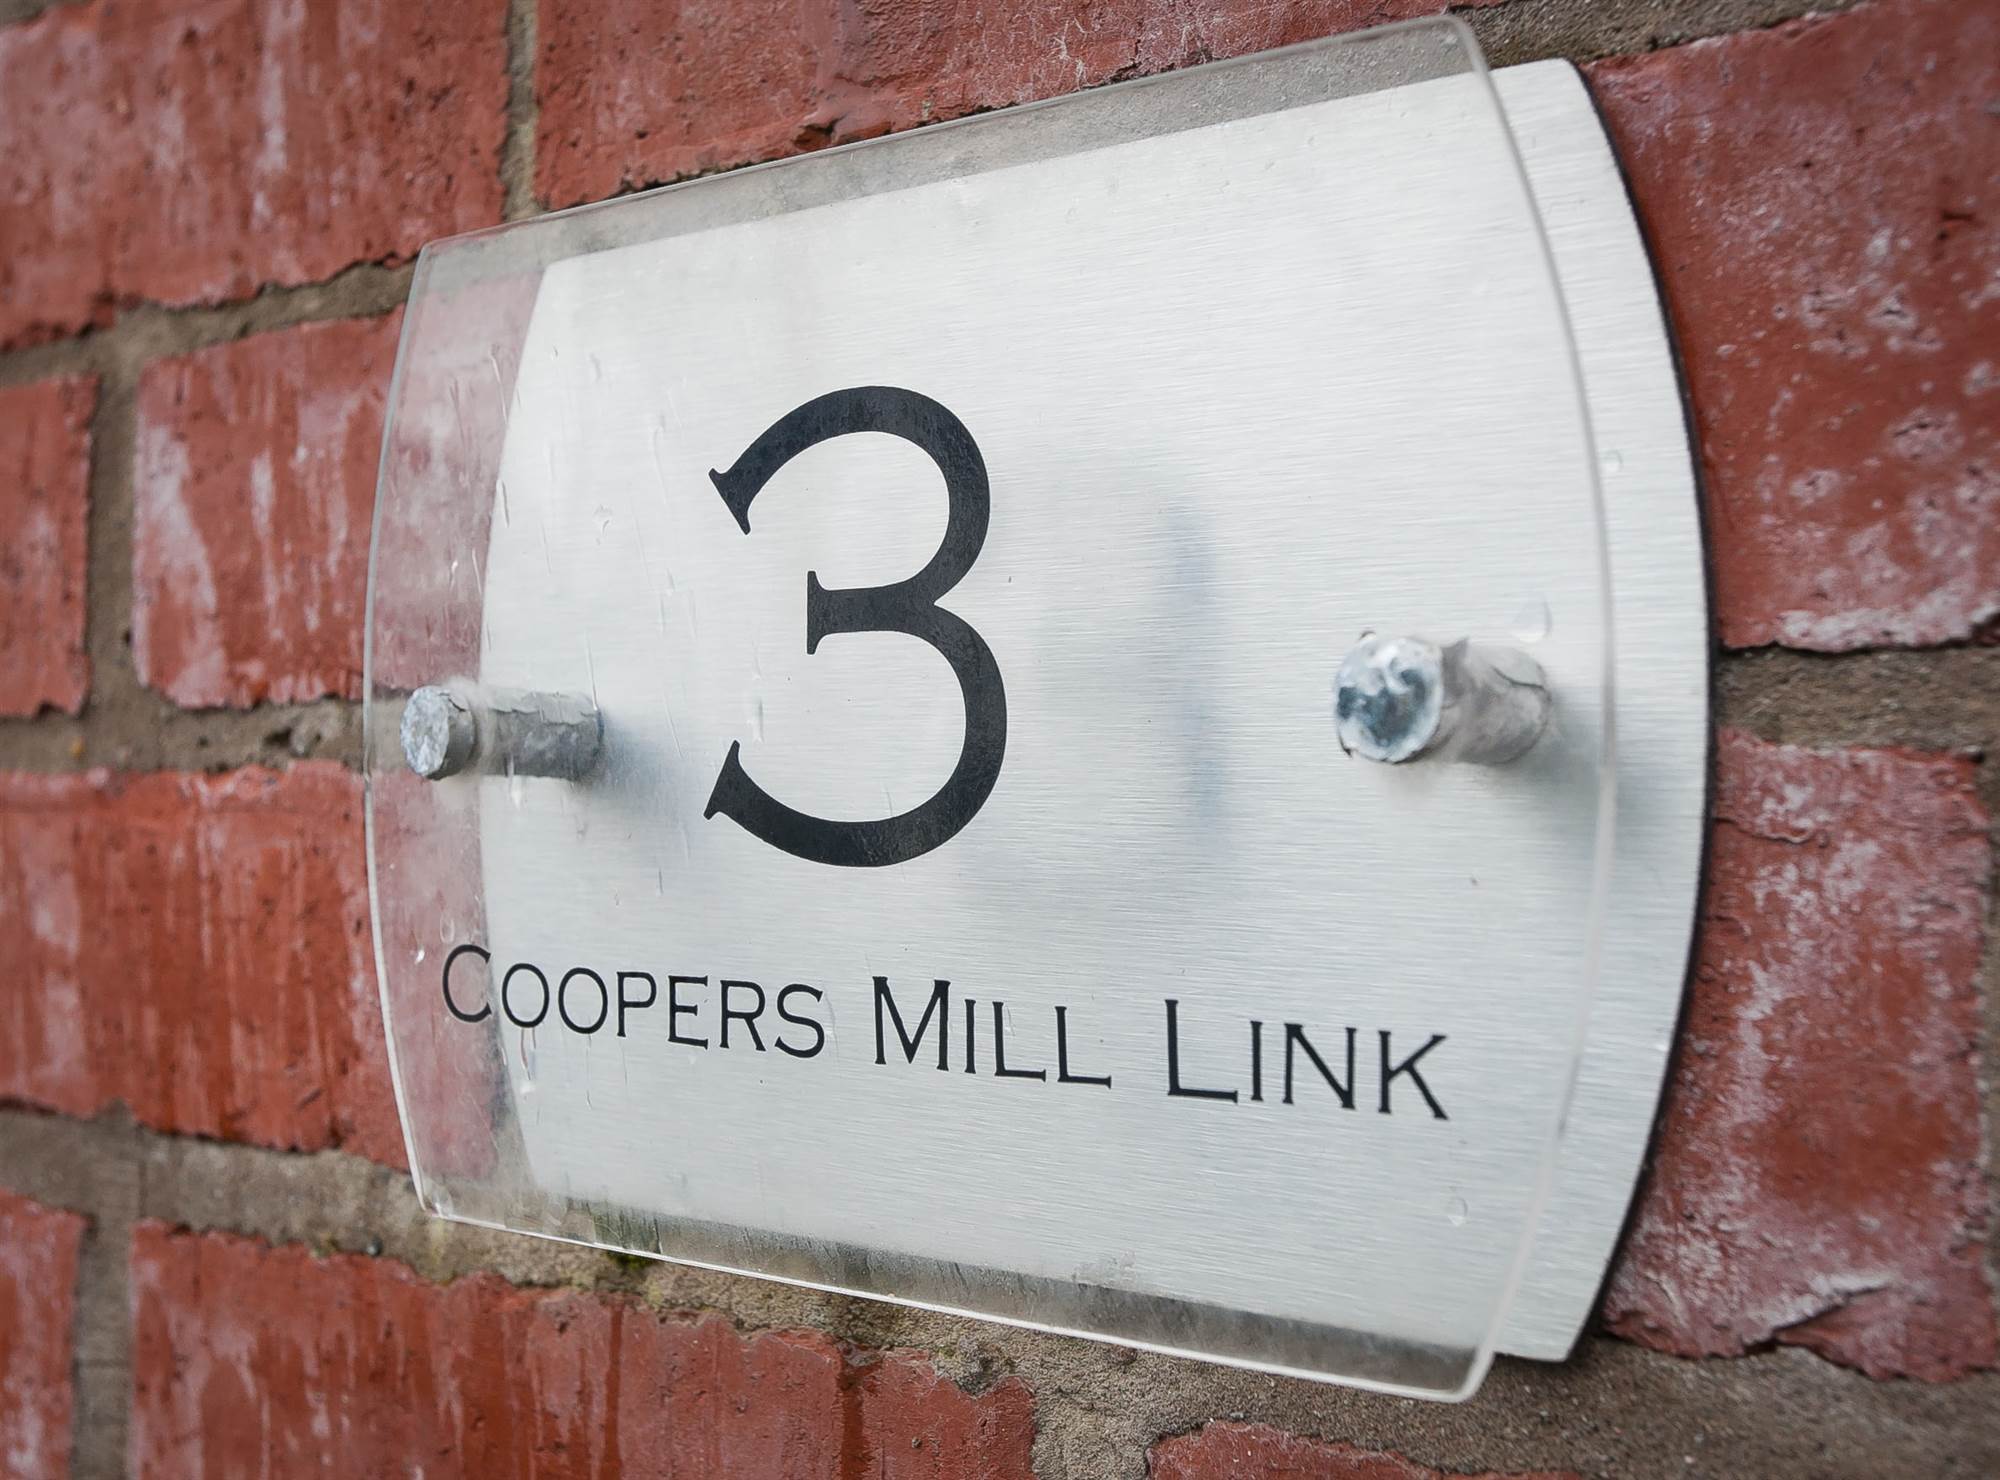 3 Coopers Mill Link